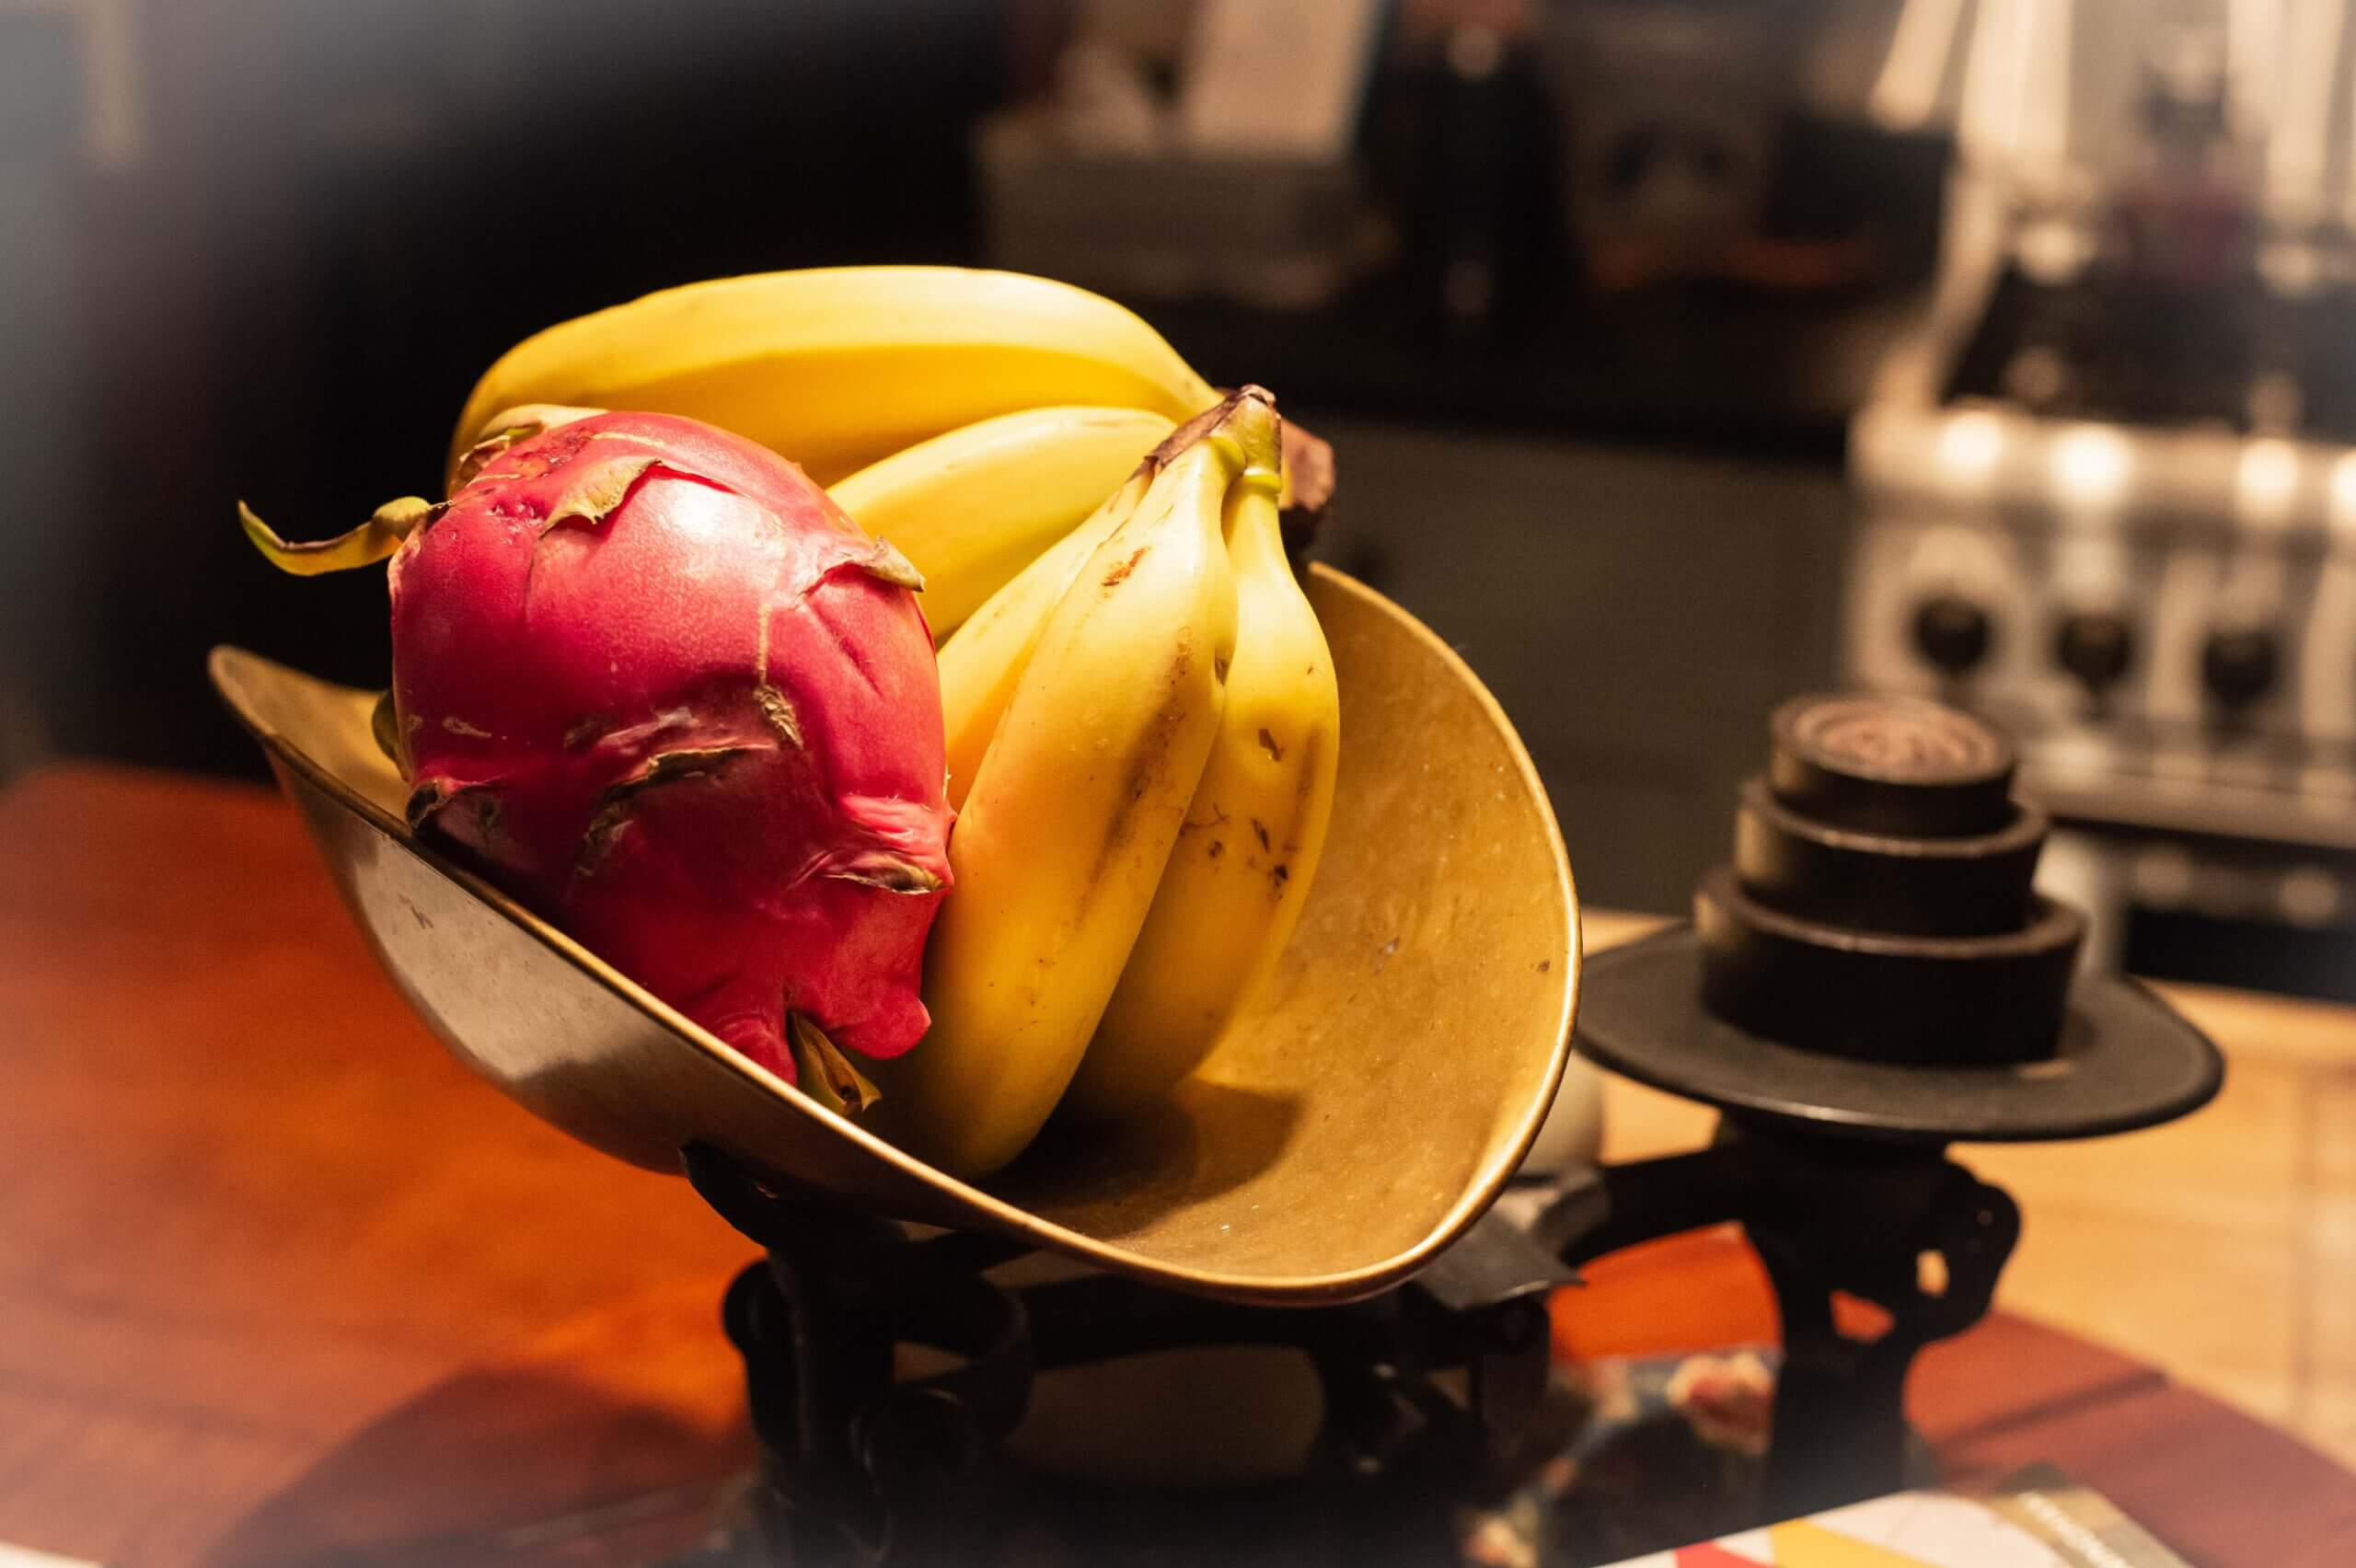 Color image of an old fashioned scale in a kitchen, with yellow bananas and a red passion fruit on one side and circular weights on the other side.